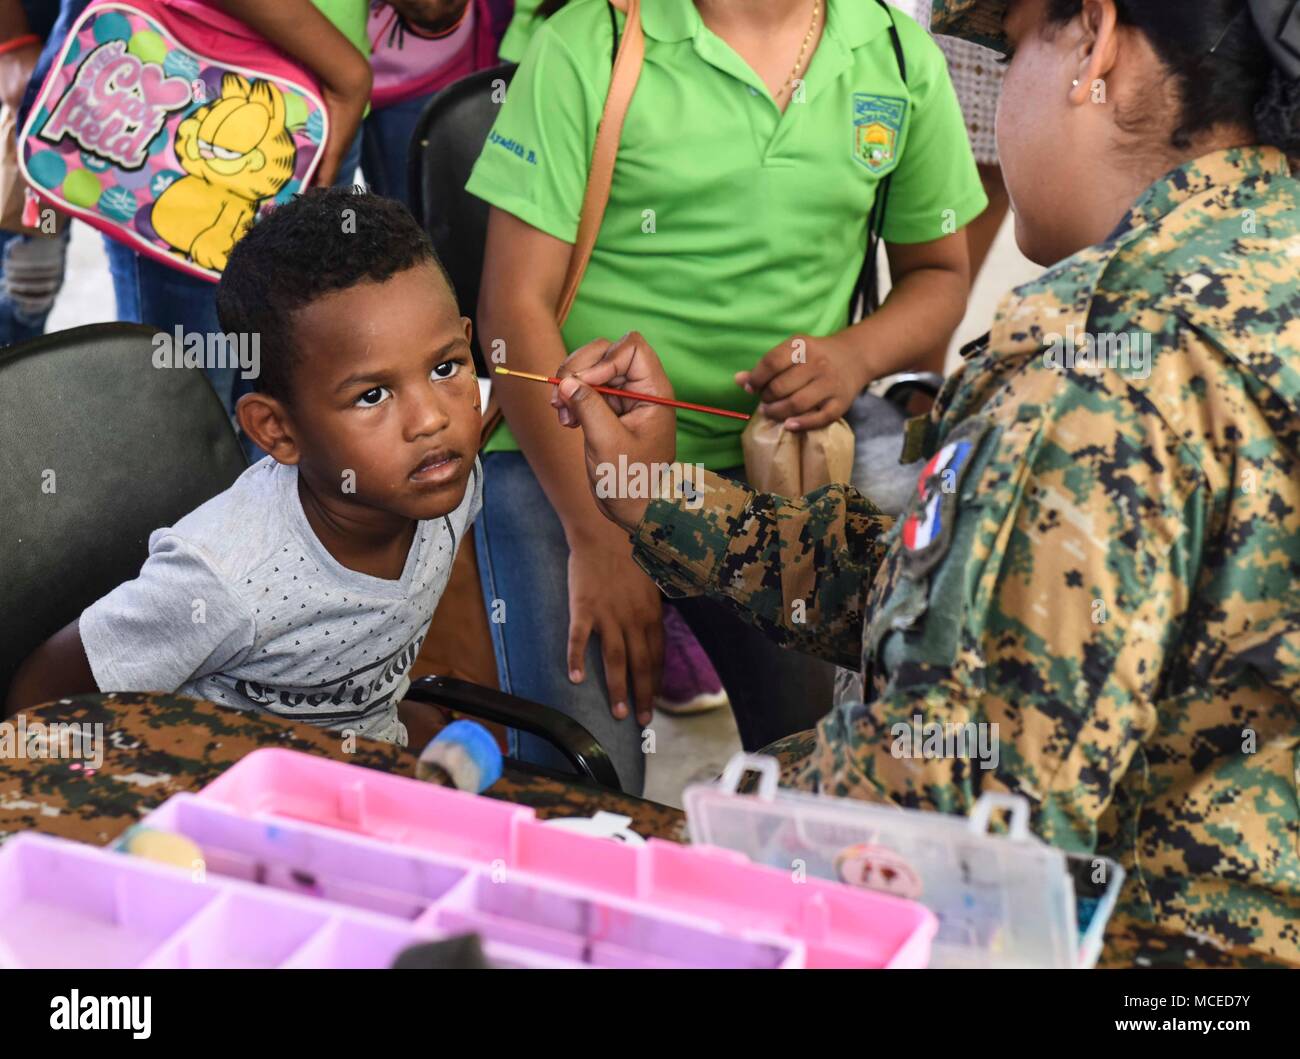 A member of the Panamanian National Border Service, known as SENAFRONT, paints the face of a child during the opening ceremony of Exercise New Horizons 2018, April 11, 2018, in Meteti, Panama. Exercise New Horizons is a joint-service training exercise, focused on enhancing relations with partner nations and providing aid to local communities while providing training U.S. military members. During the exercise, U.S. military members will build three schools, one community center and a women’s health ward in the Meteti area. They will also work closely with Panamanian health providers bringing me Stock Photo